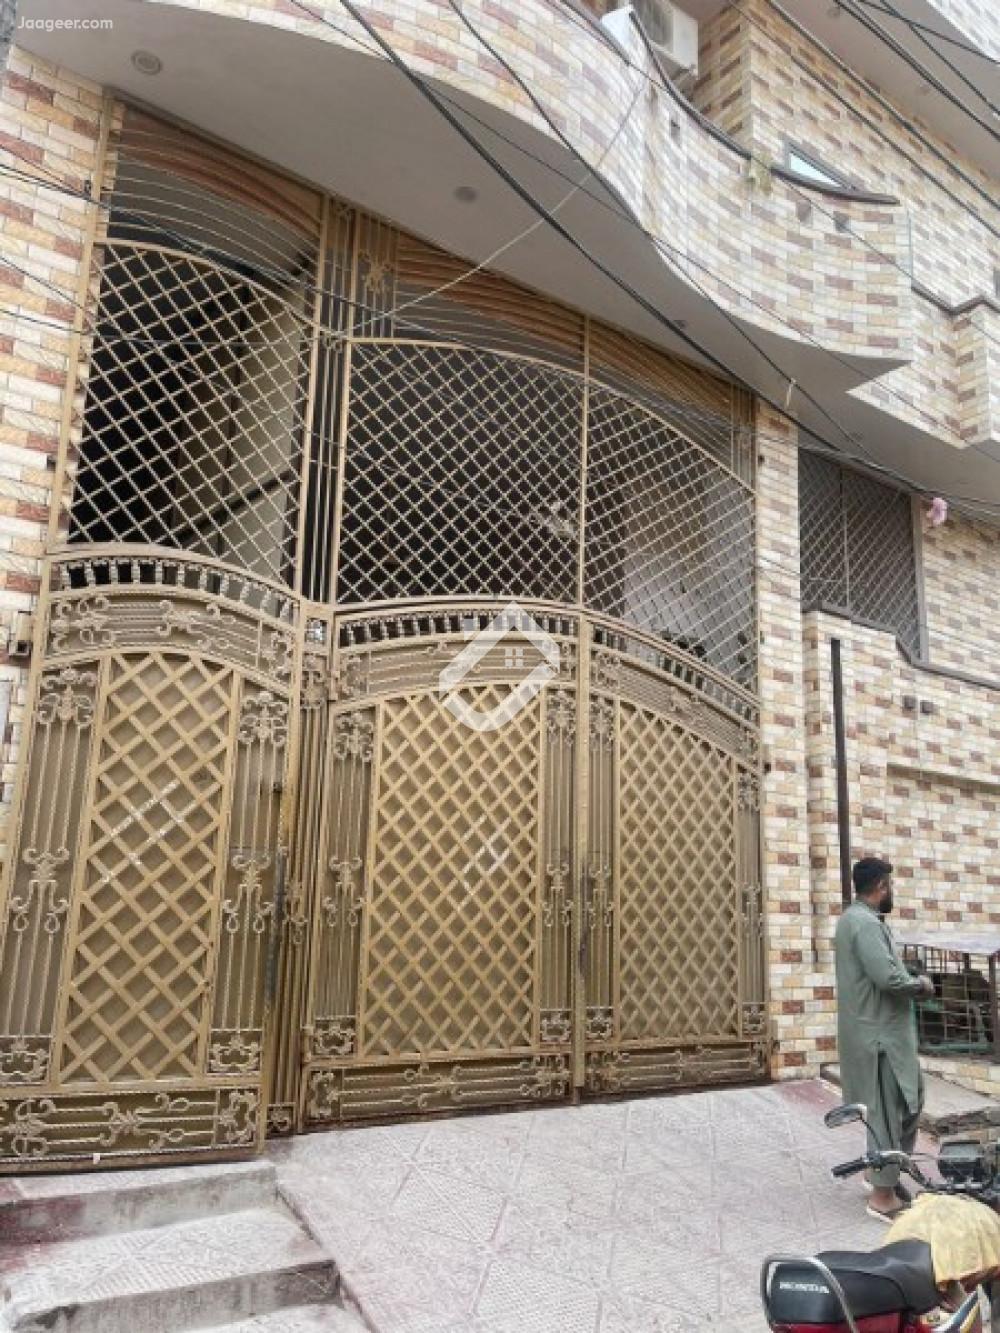 Main image 5 Marla House For Sale In Bashir Colony Old Satellite Town 9 No. Chungi Bashir Colony Near Bismillah Bakery